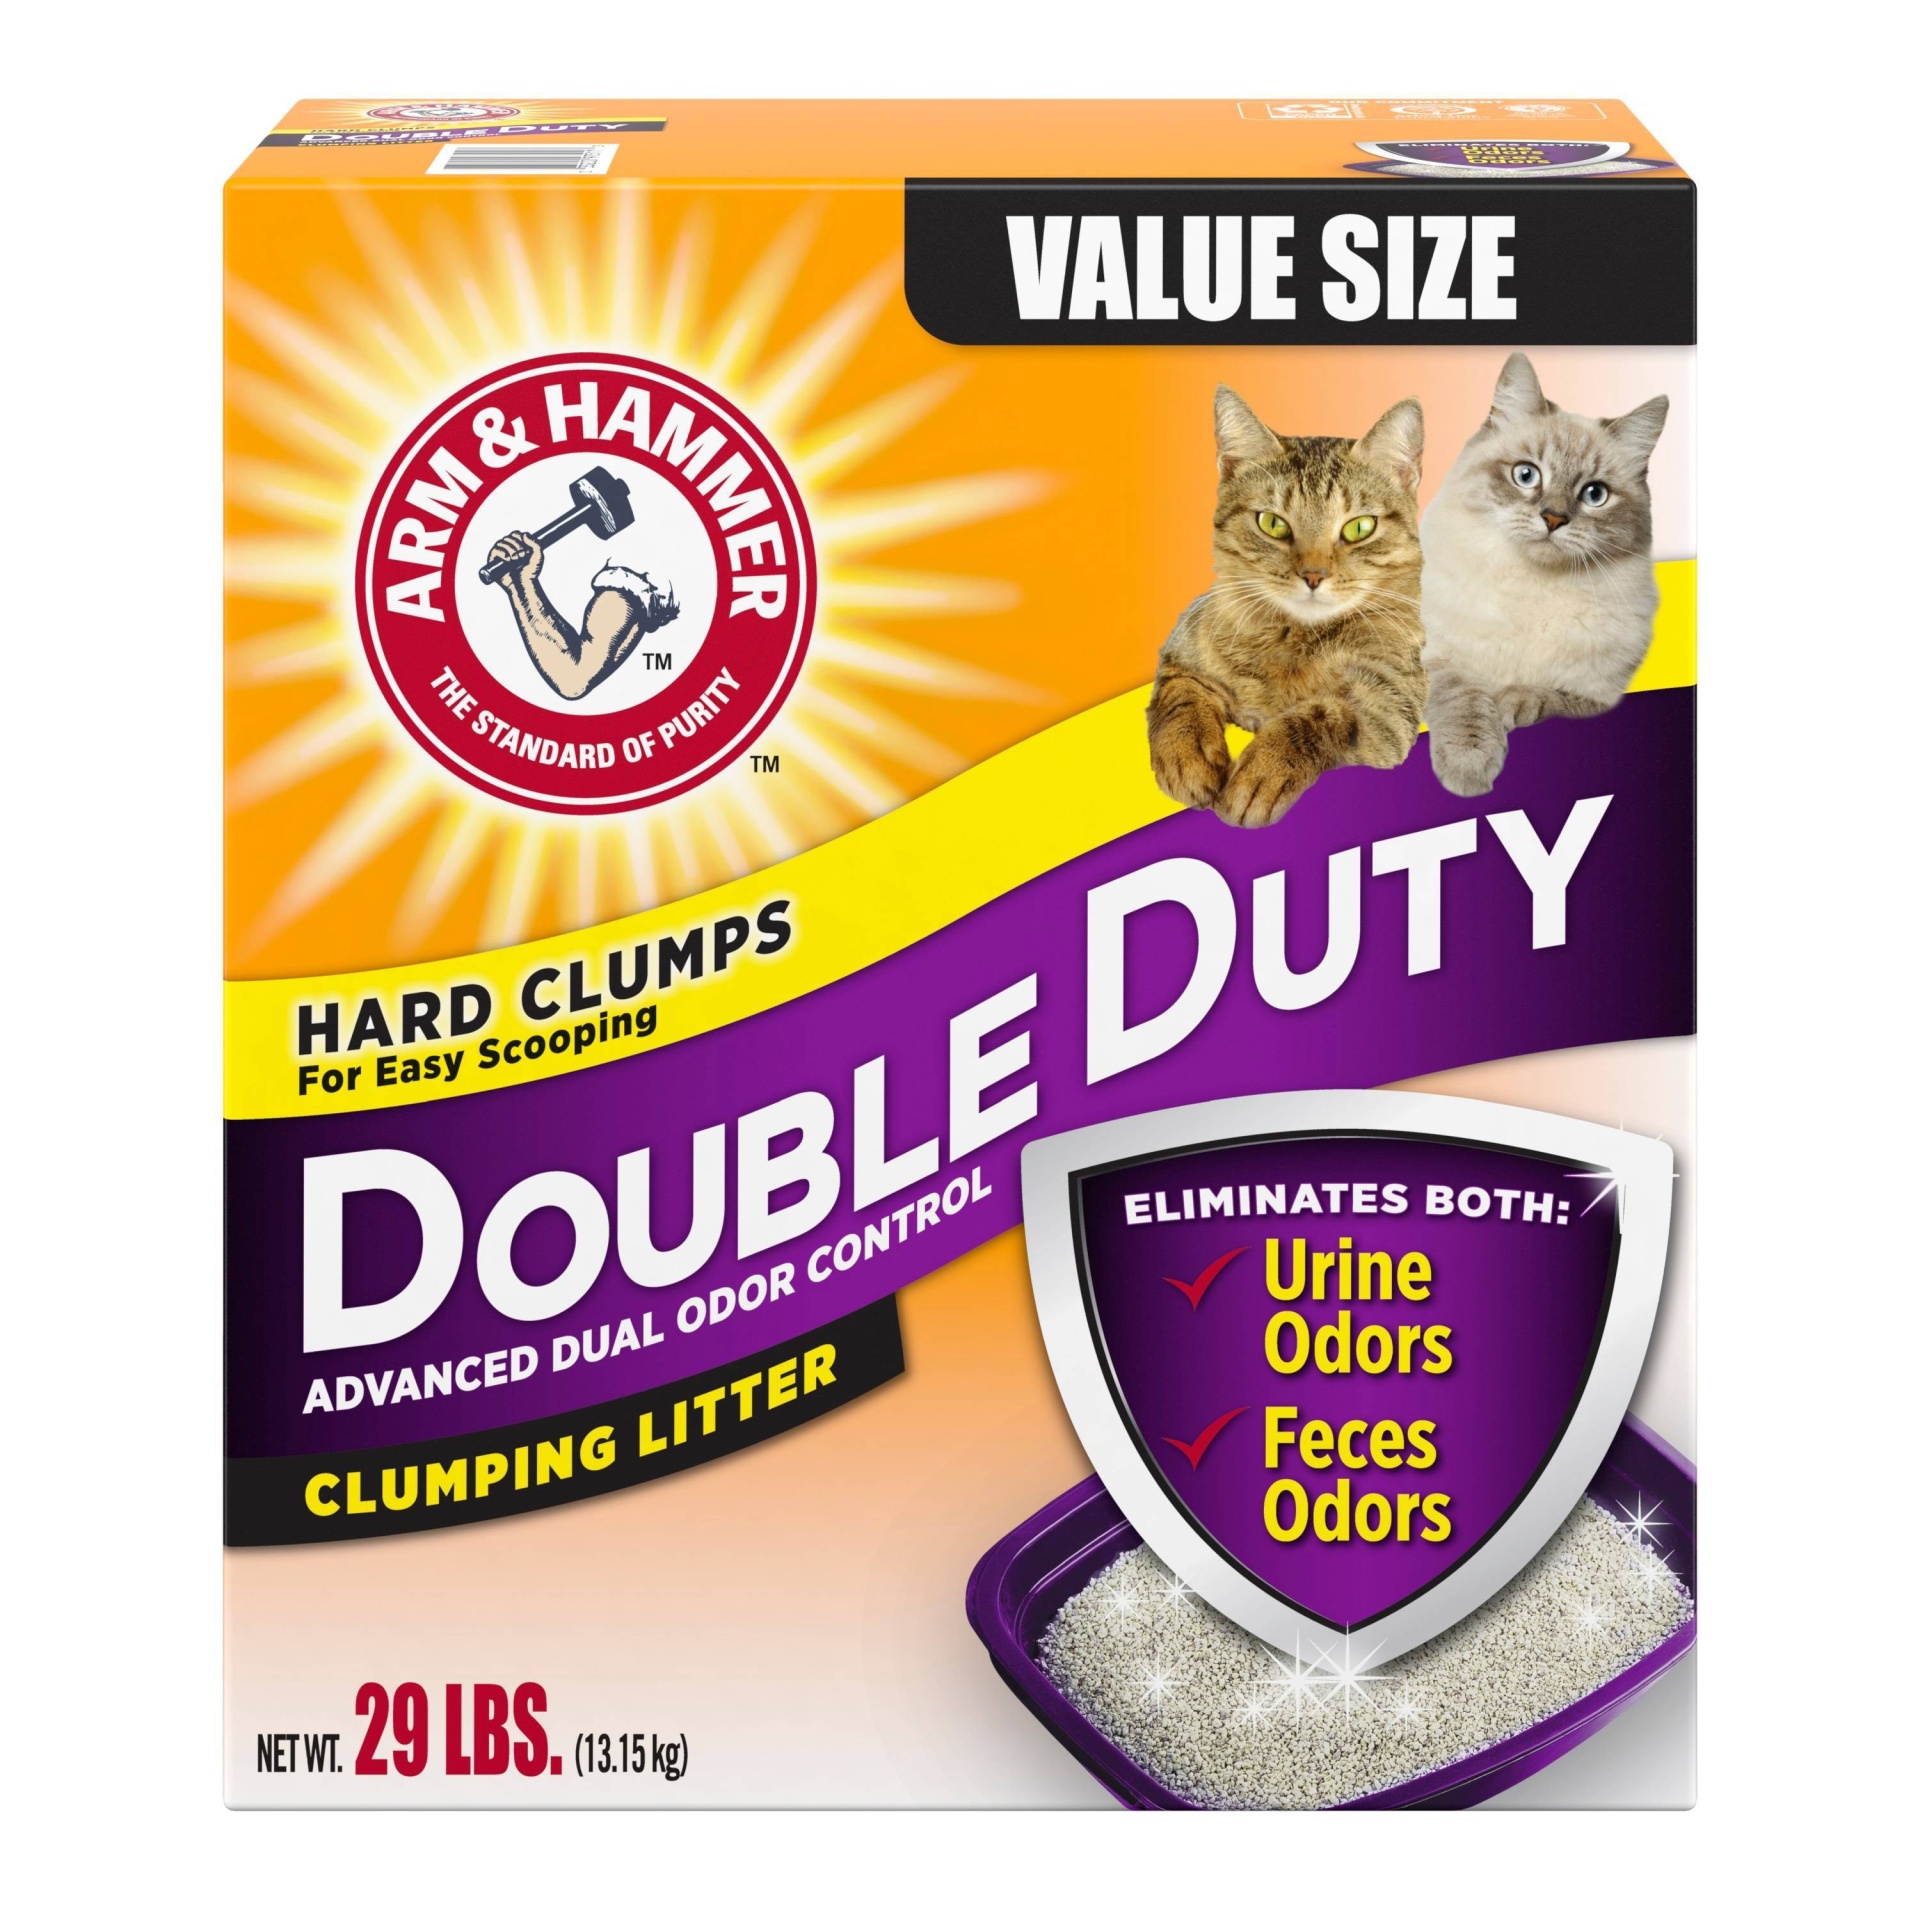 slide 1 of 1, ARM & HAMMER Double Duty Advanced Dual Odor Control Clumping Litter - 29lbs, 29 lb